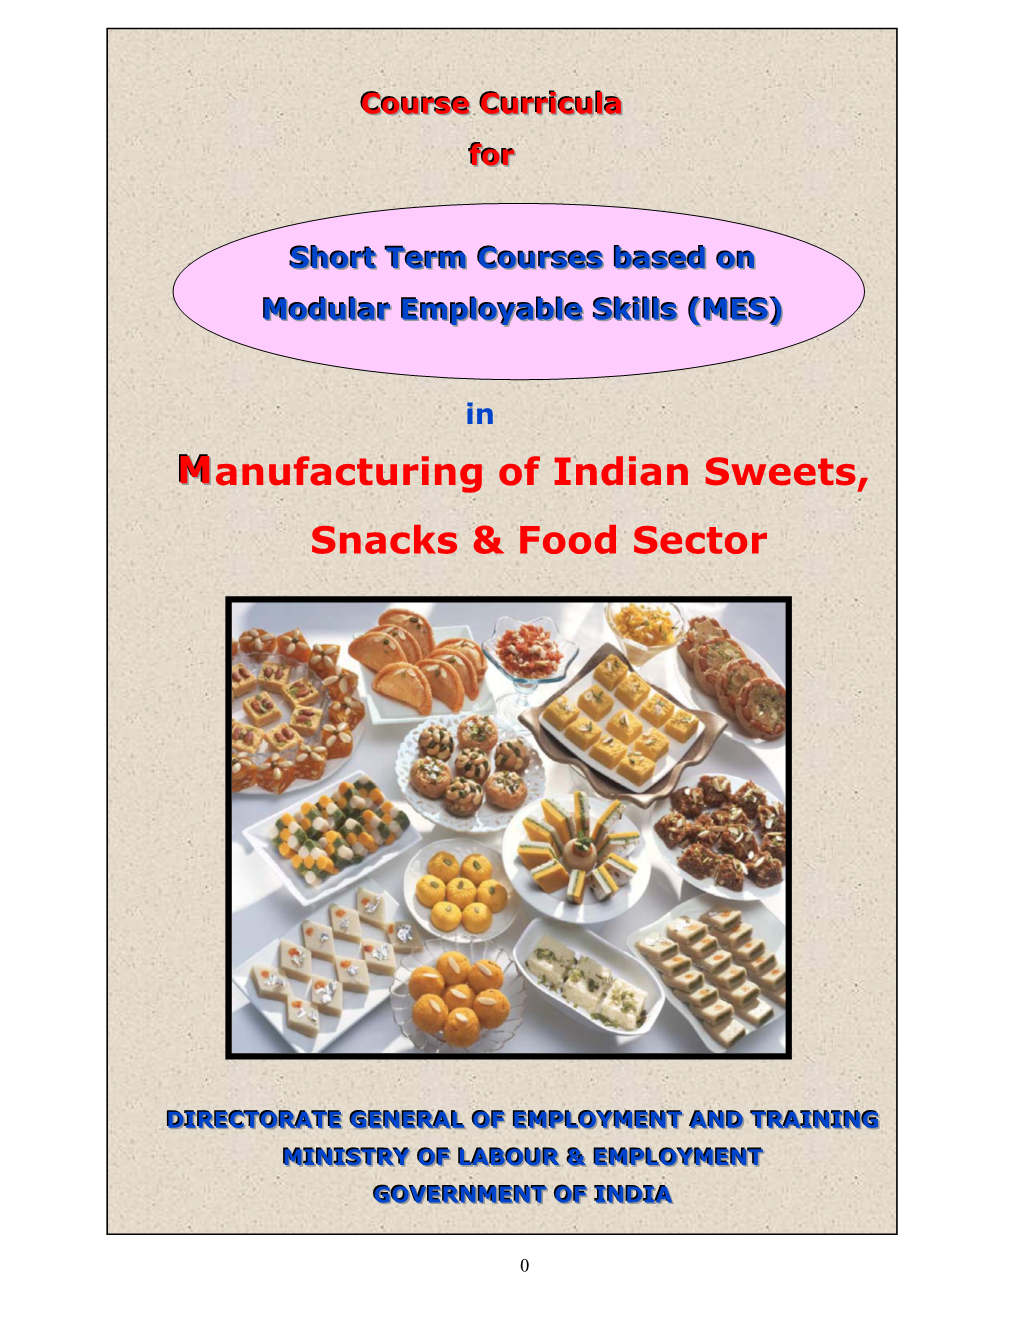 Mmanufacturing of Indian Sweets, Snacks & Food Sector